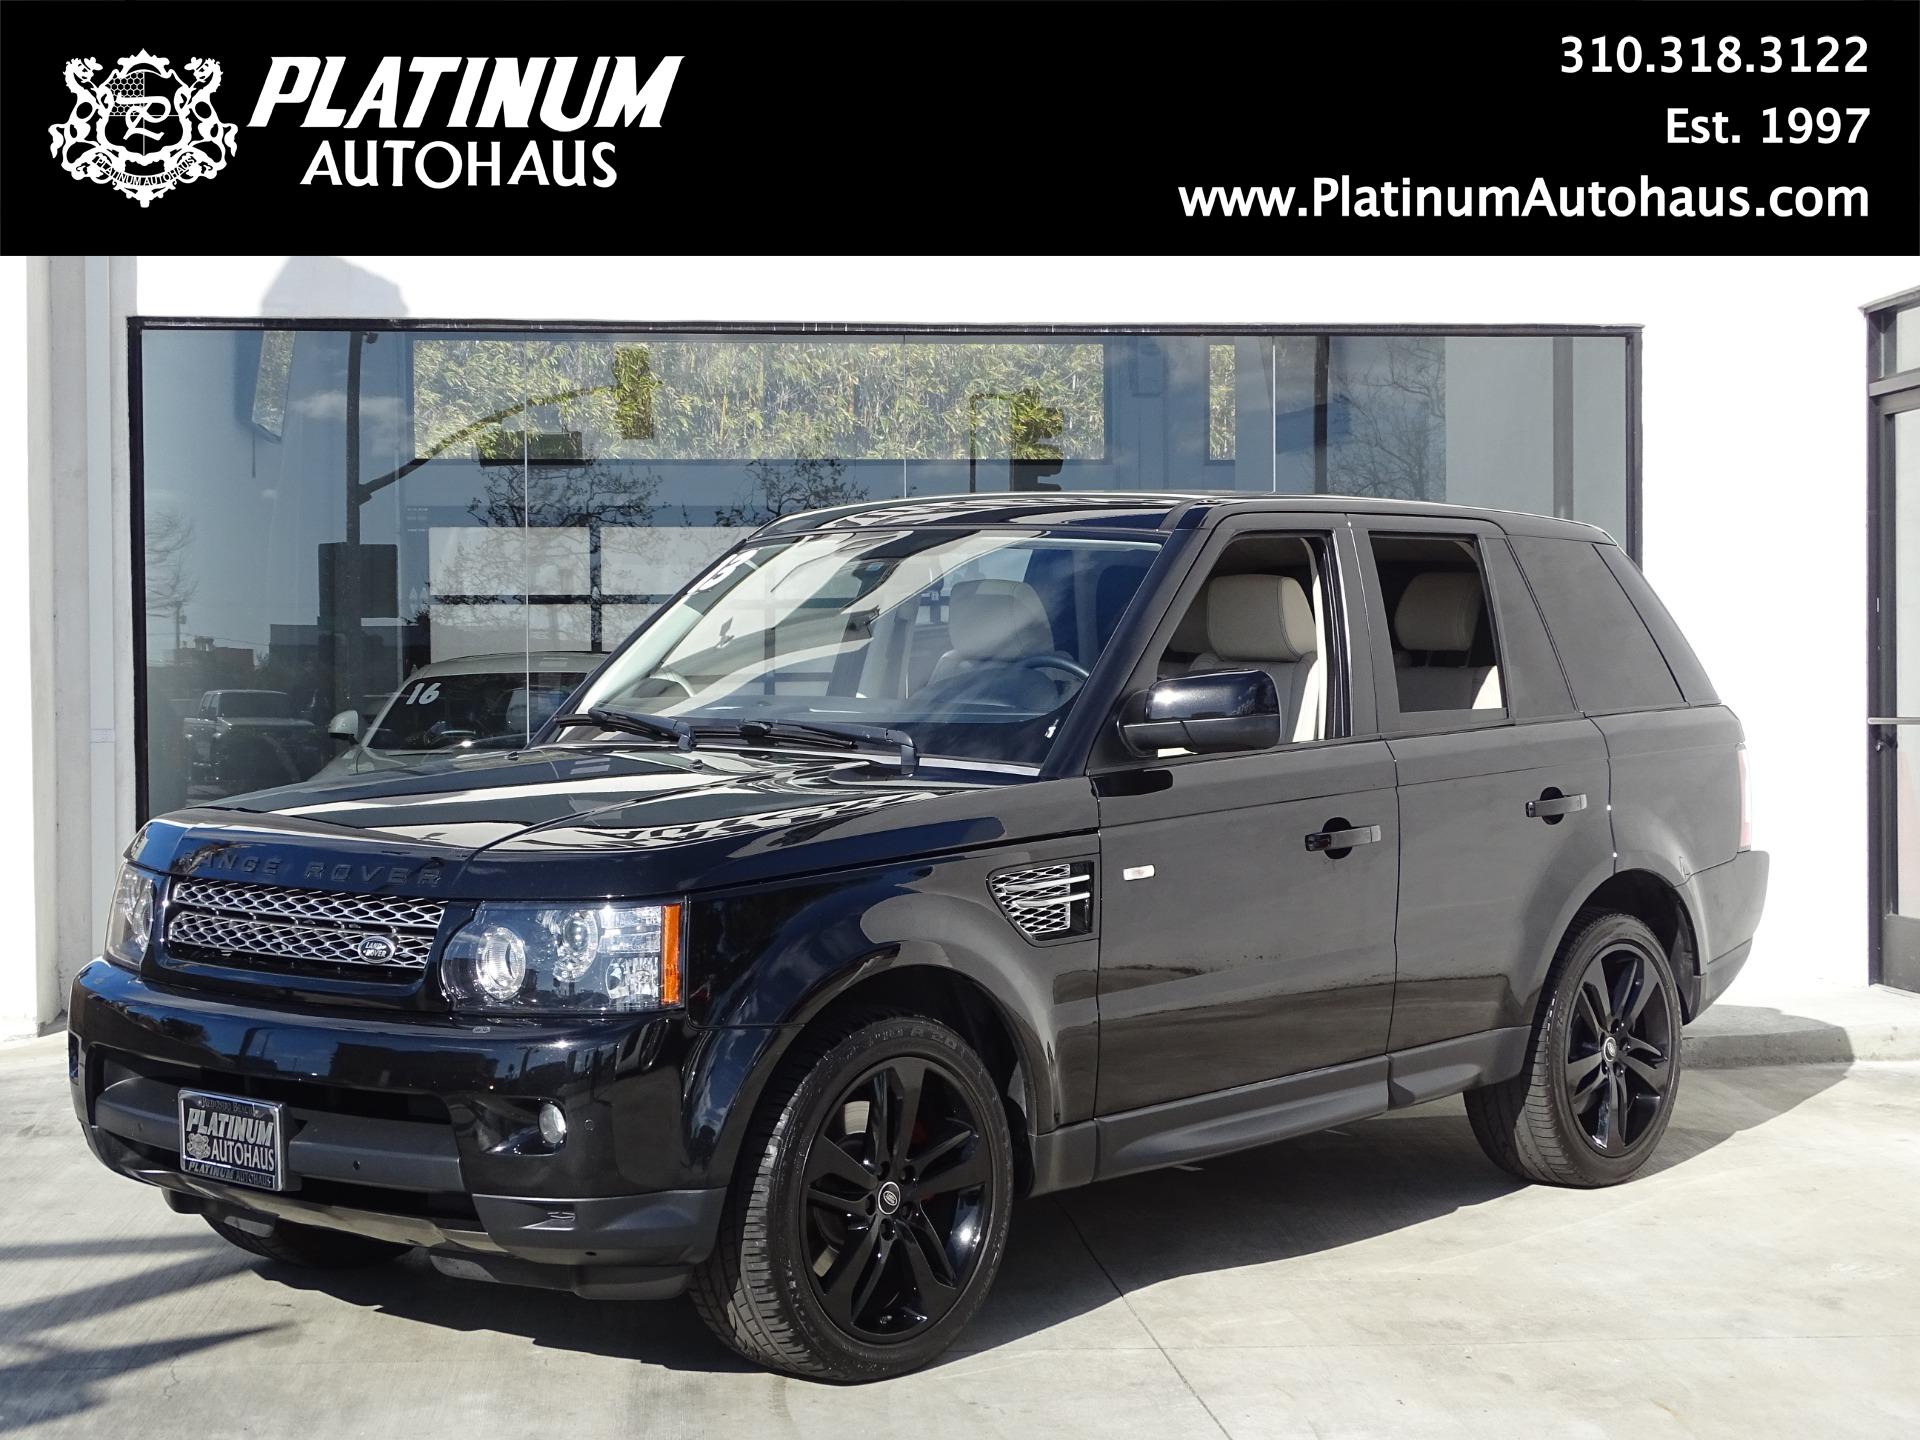 Welsprekend Vies Lunch 2013 Land Rover Range Rover Sport HSE LUX Stock # 6409A for sale near  Redondo Beach, CA | CA Land Rover Dealer